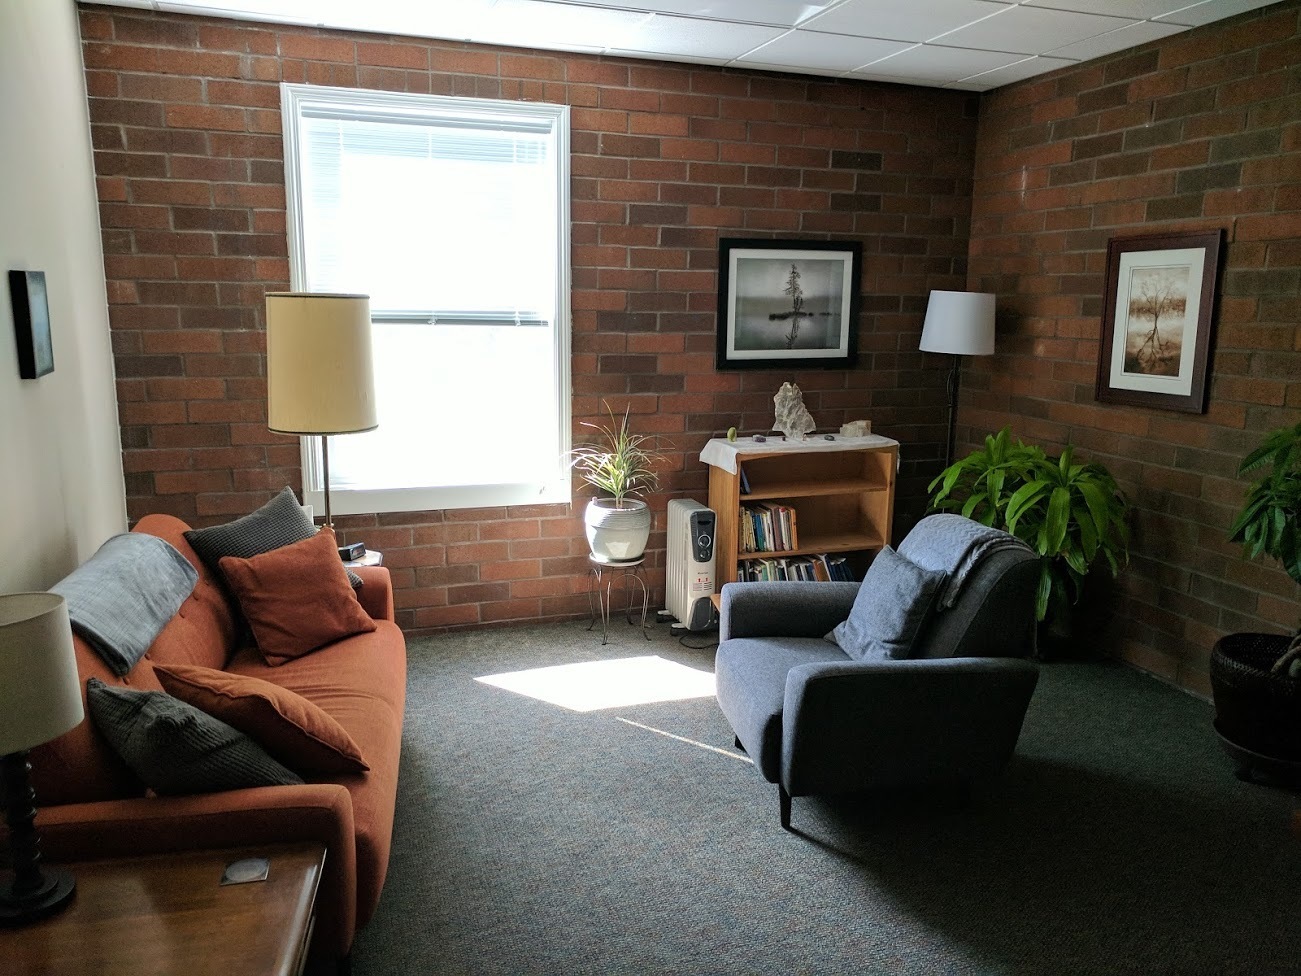 Gallery Photo of Spacious office with natural light, plants, art, and a comfy couch!